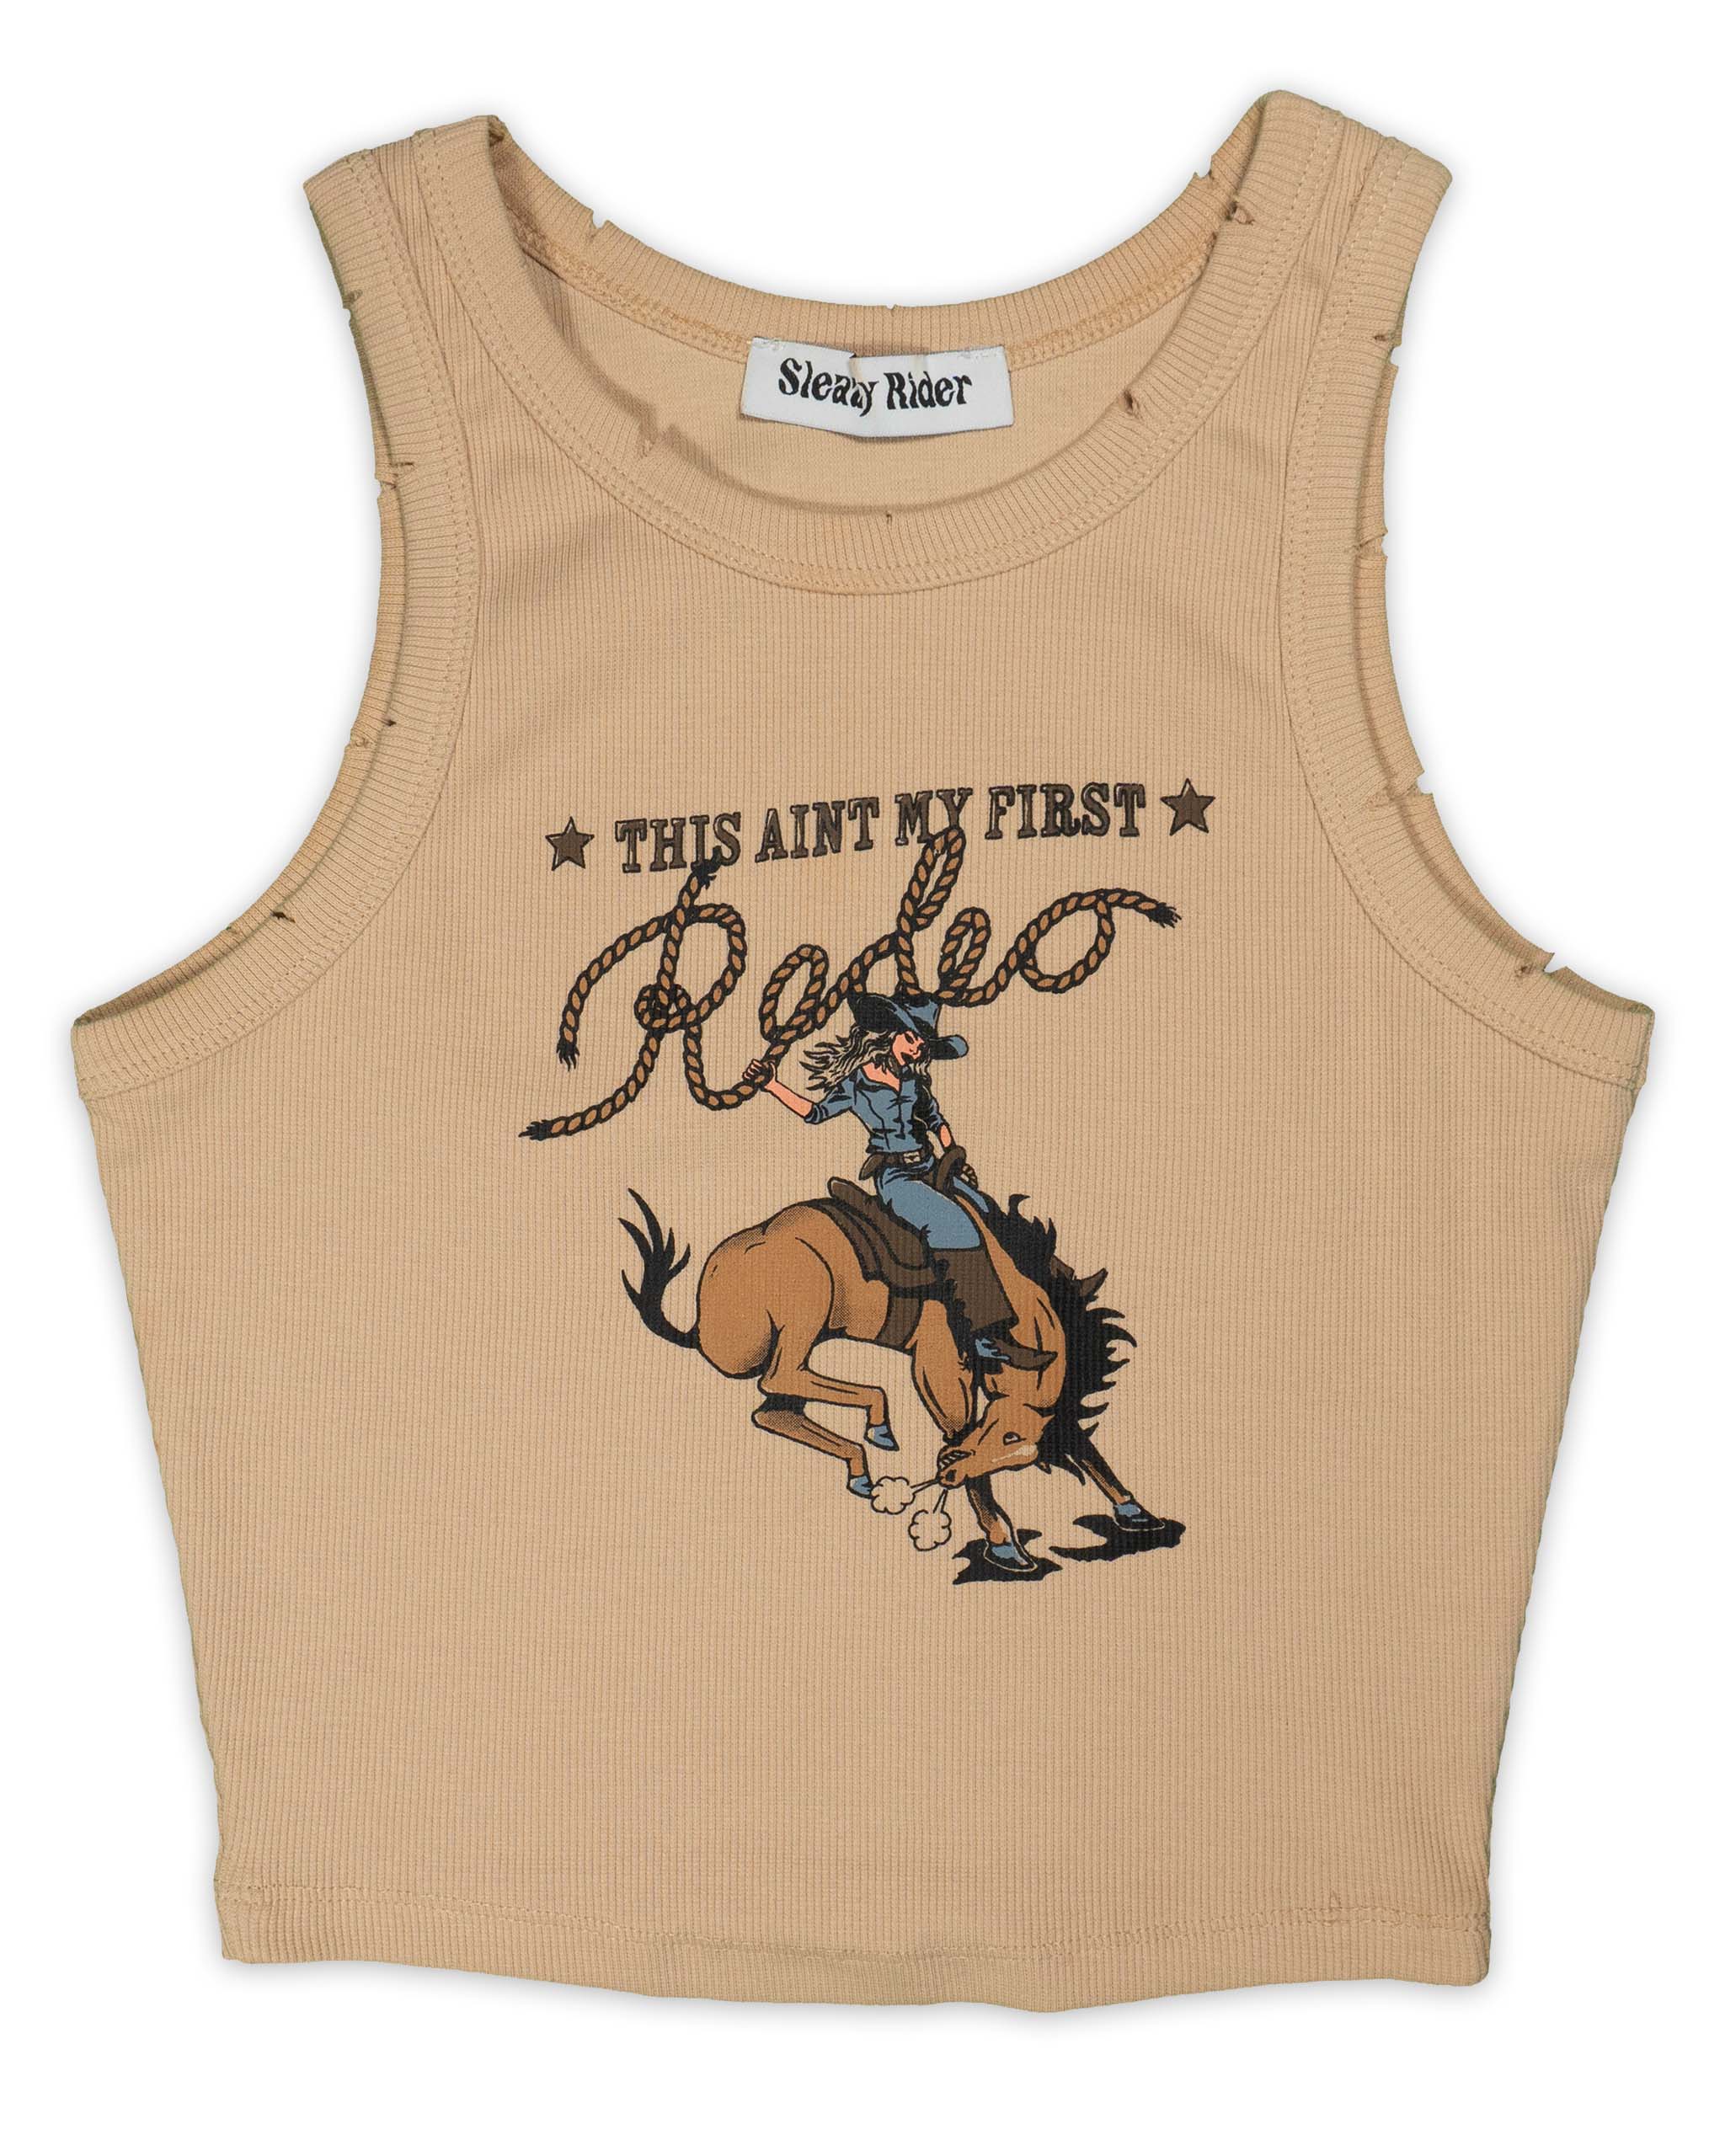 First Rodeo tank top by Sleazy Rider